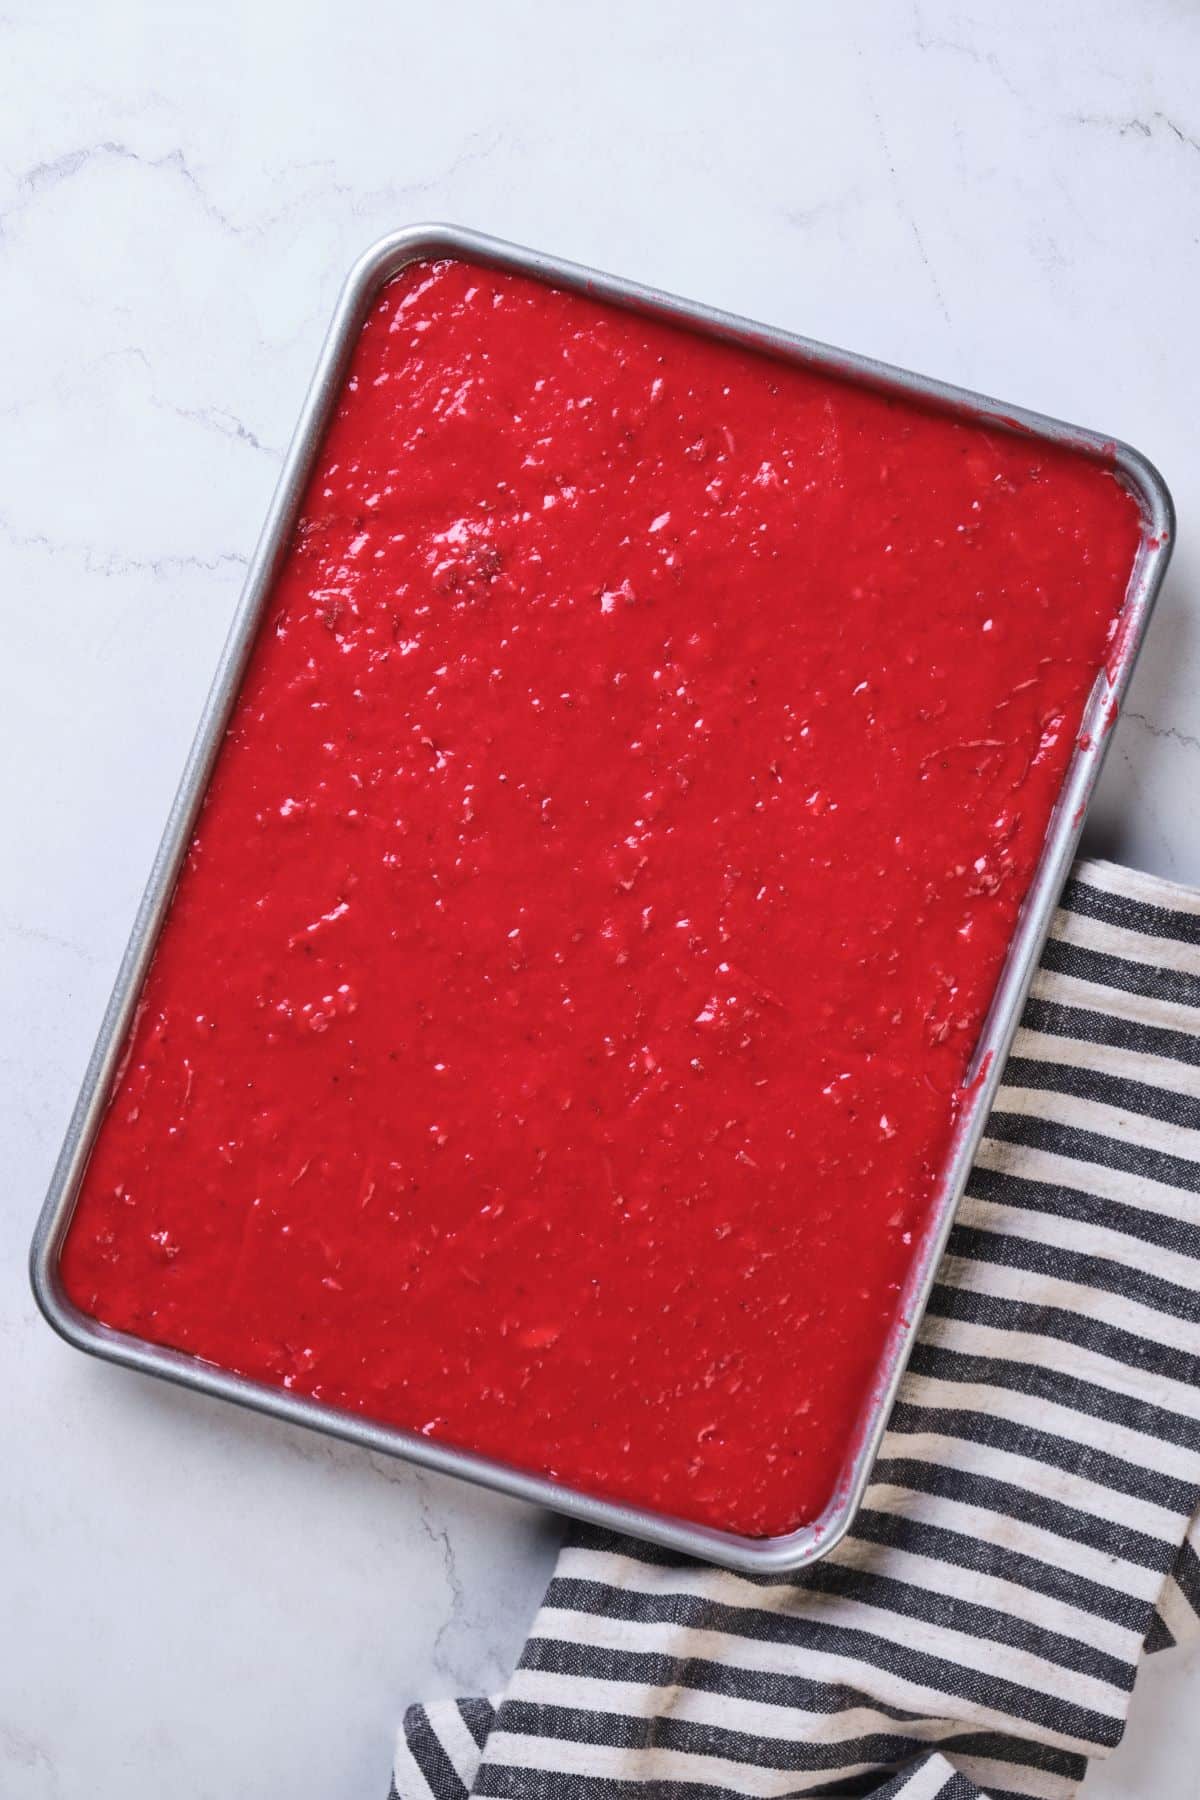 The fresh strawberry cake batter spread out in a cake pan.